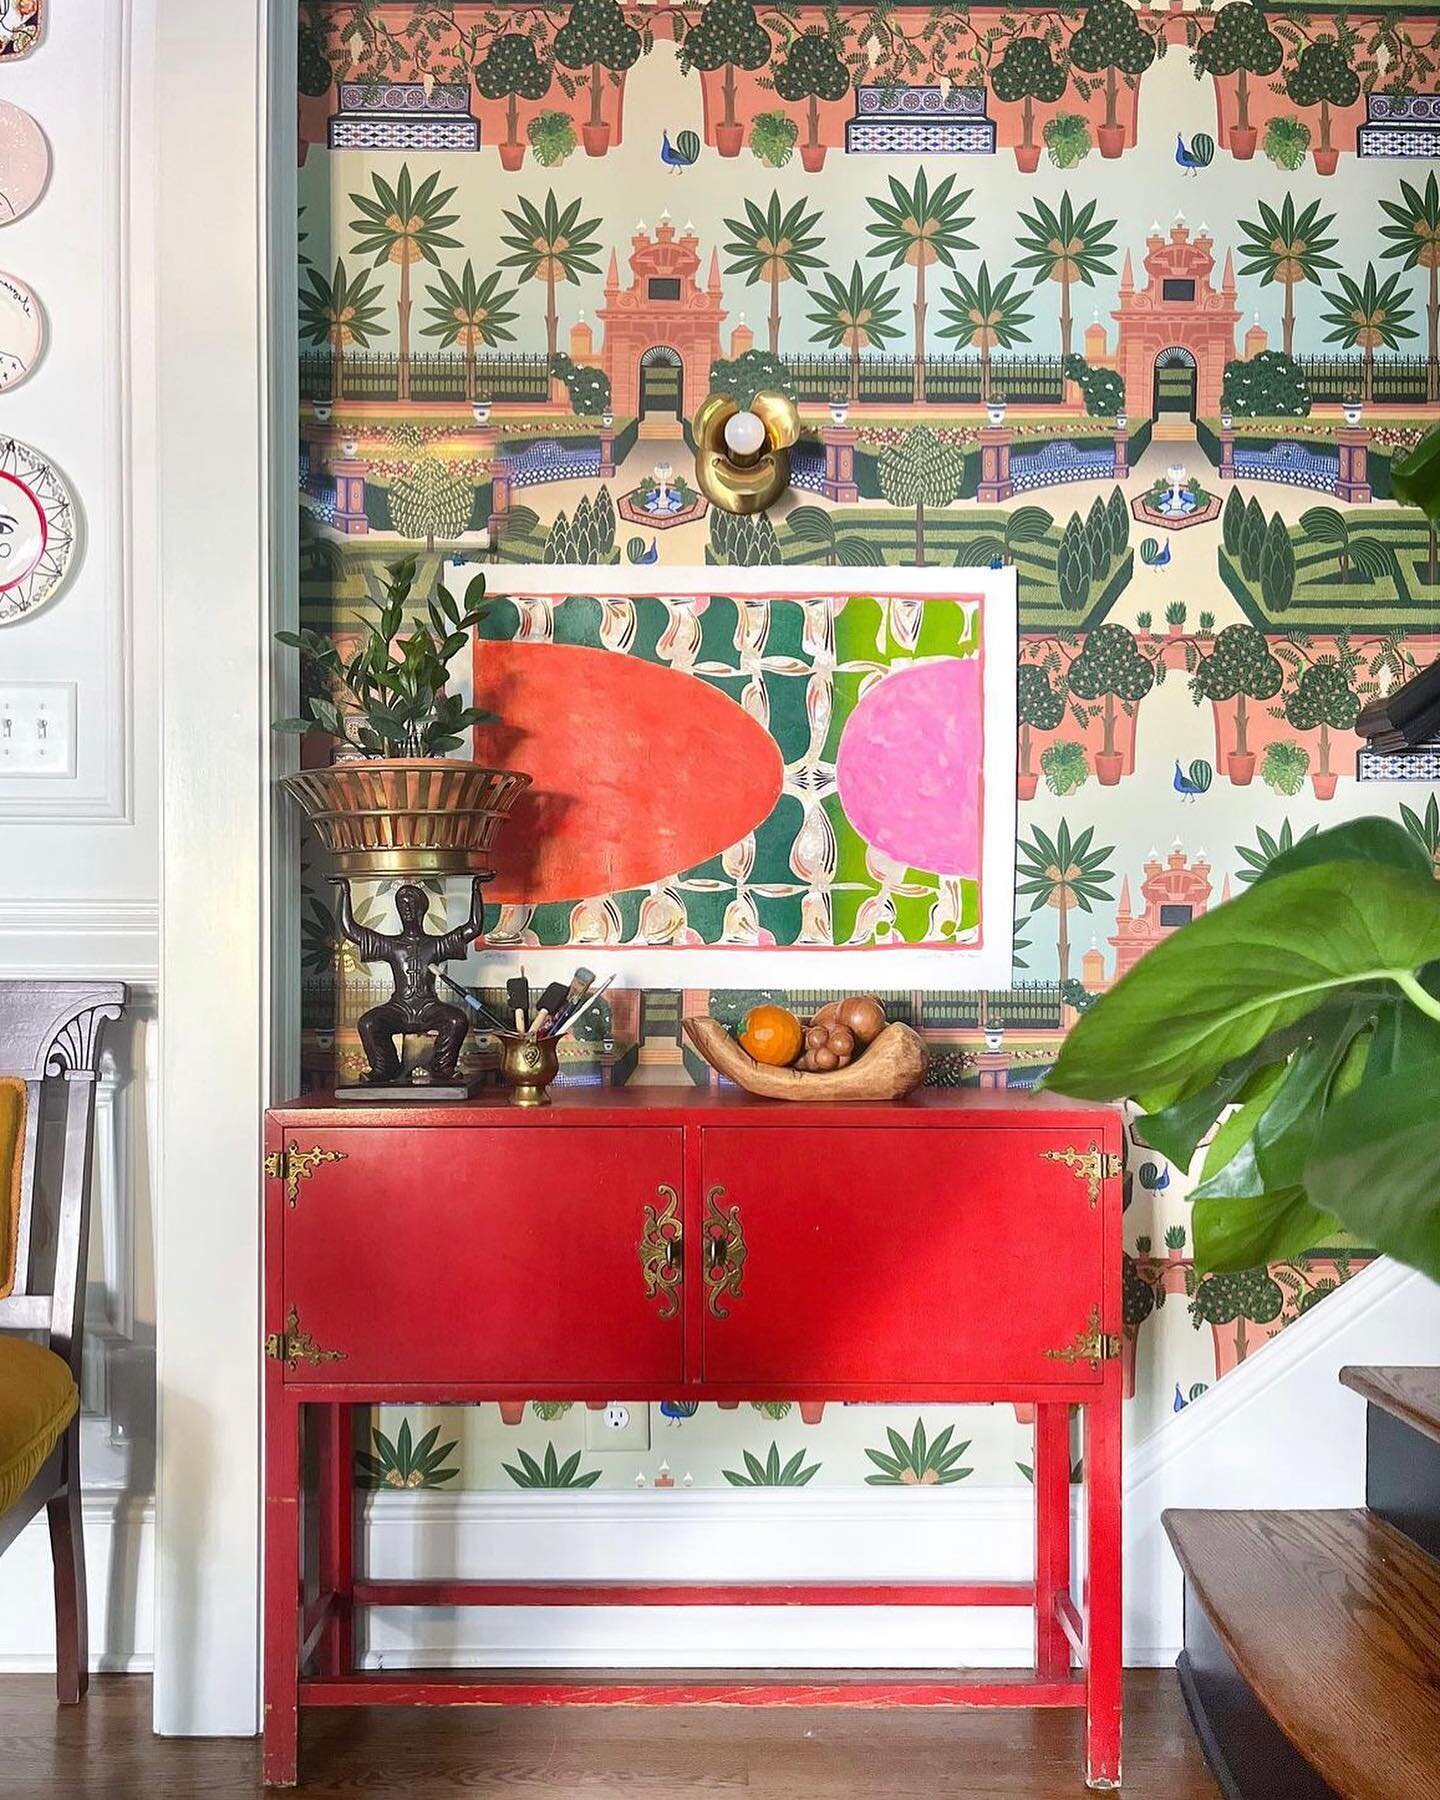 This bright landing feels like a quick takeoff to somewhere fabulous! 🌴The layered meld of bold colors, patterns, and materials brings so much personality to a space that&rsquo;s often looked over, but has so much potential. We&rsquo;re completely d